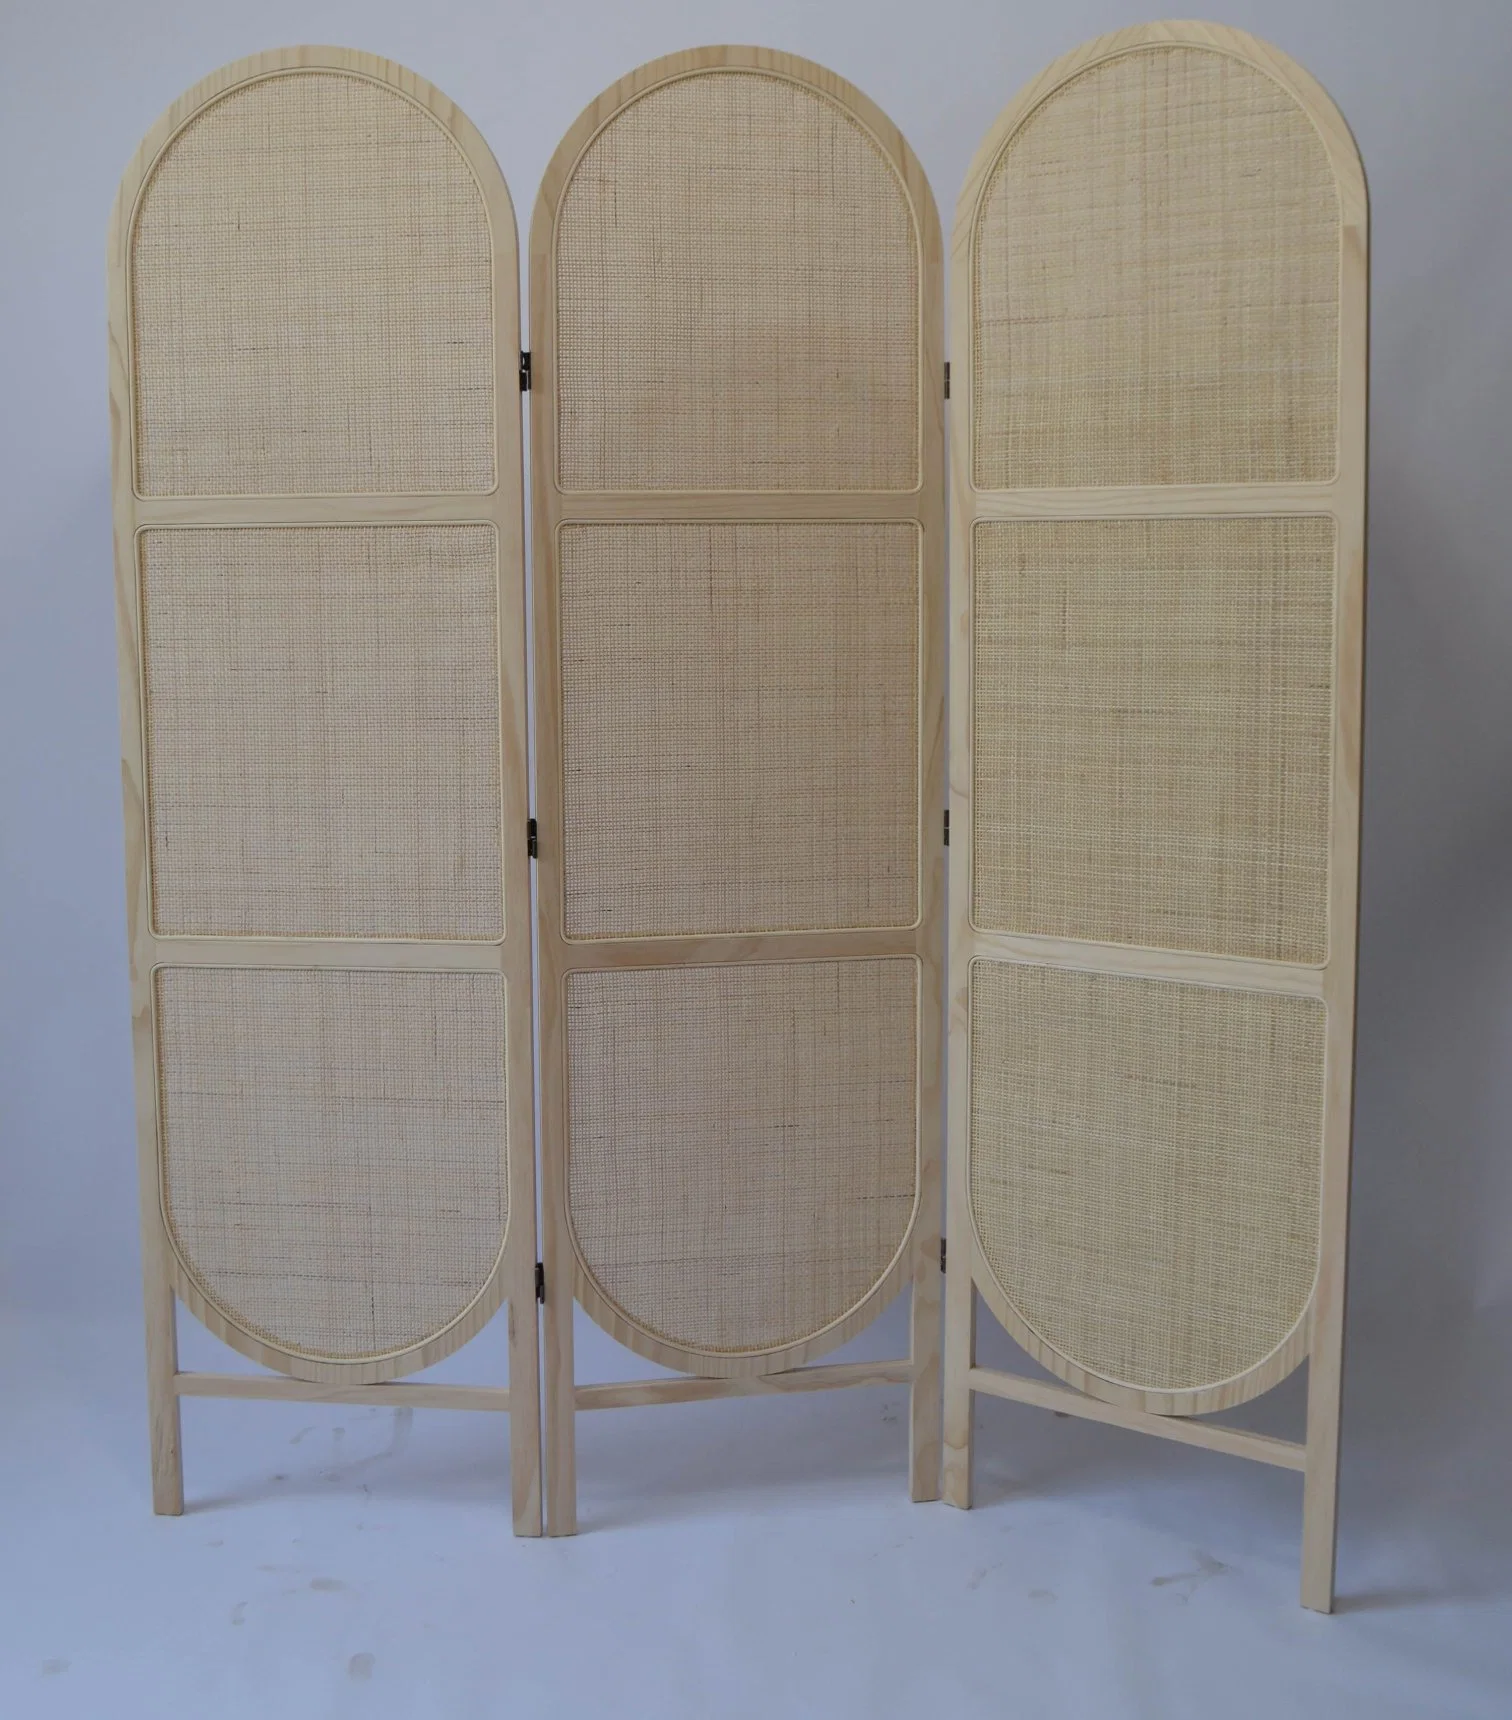 Wood Folding Screen with Rattan Woven Room Divider with 3 Panel